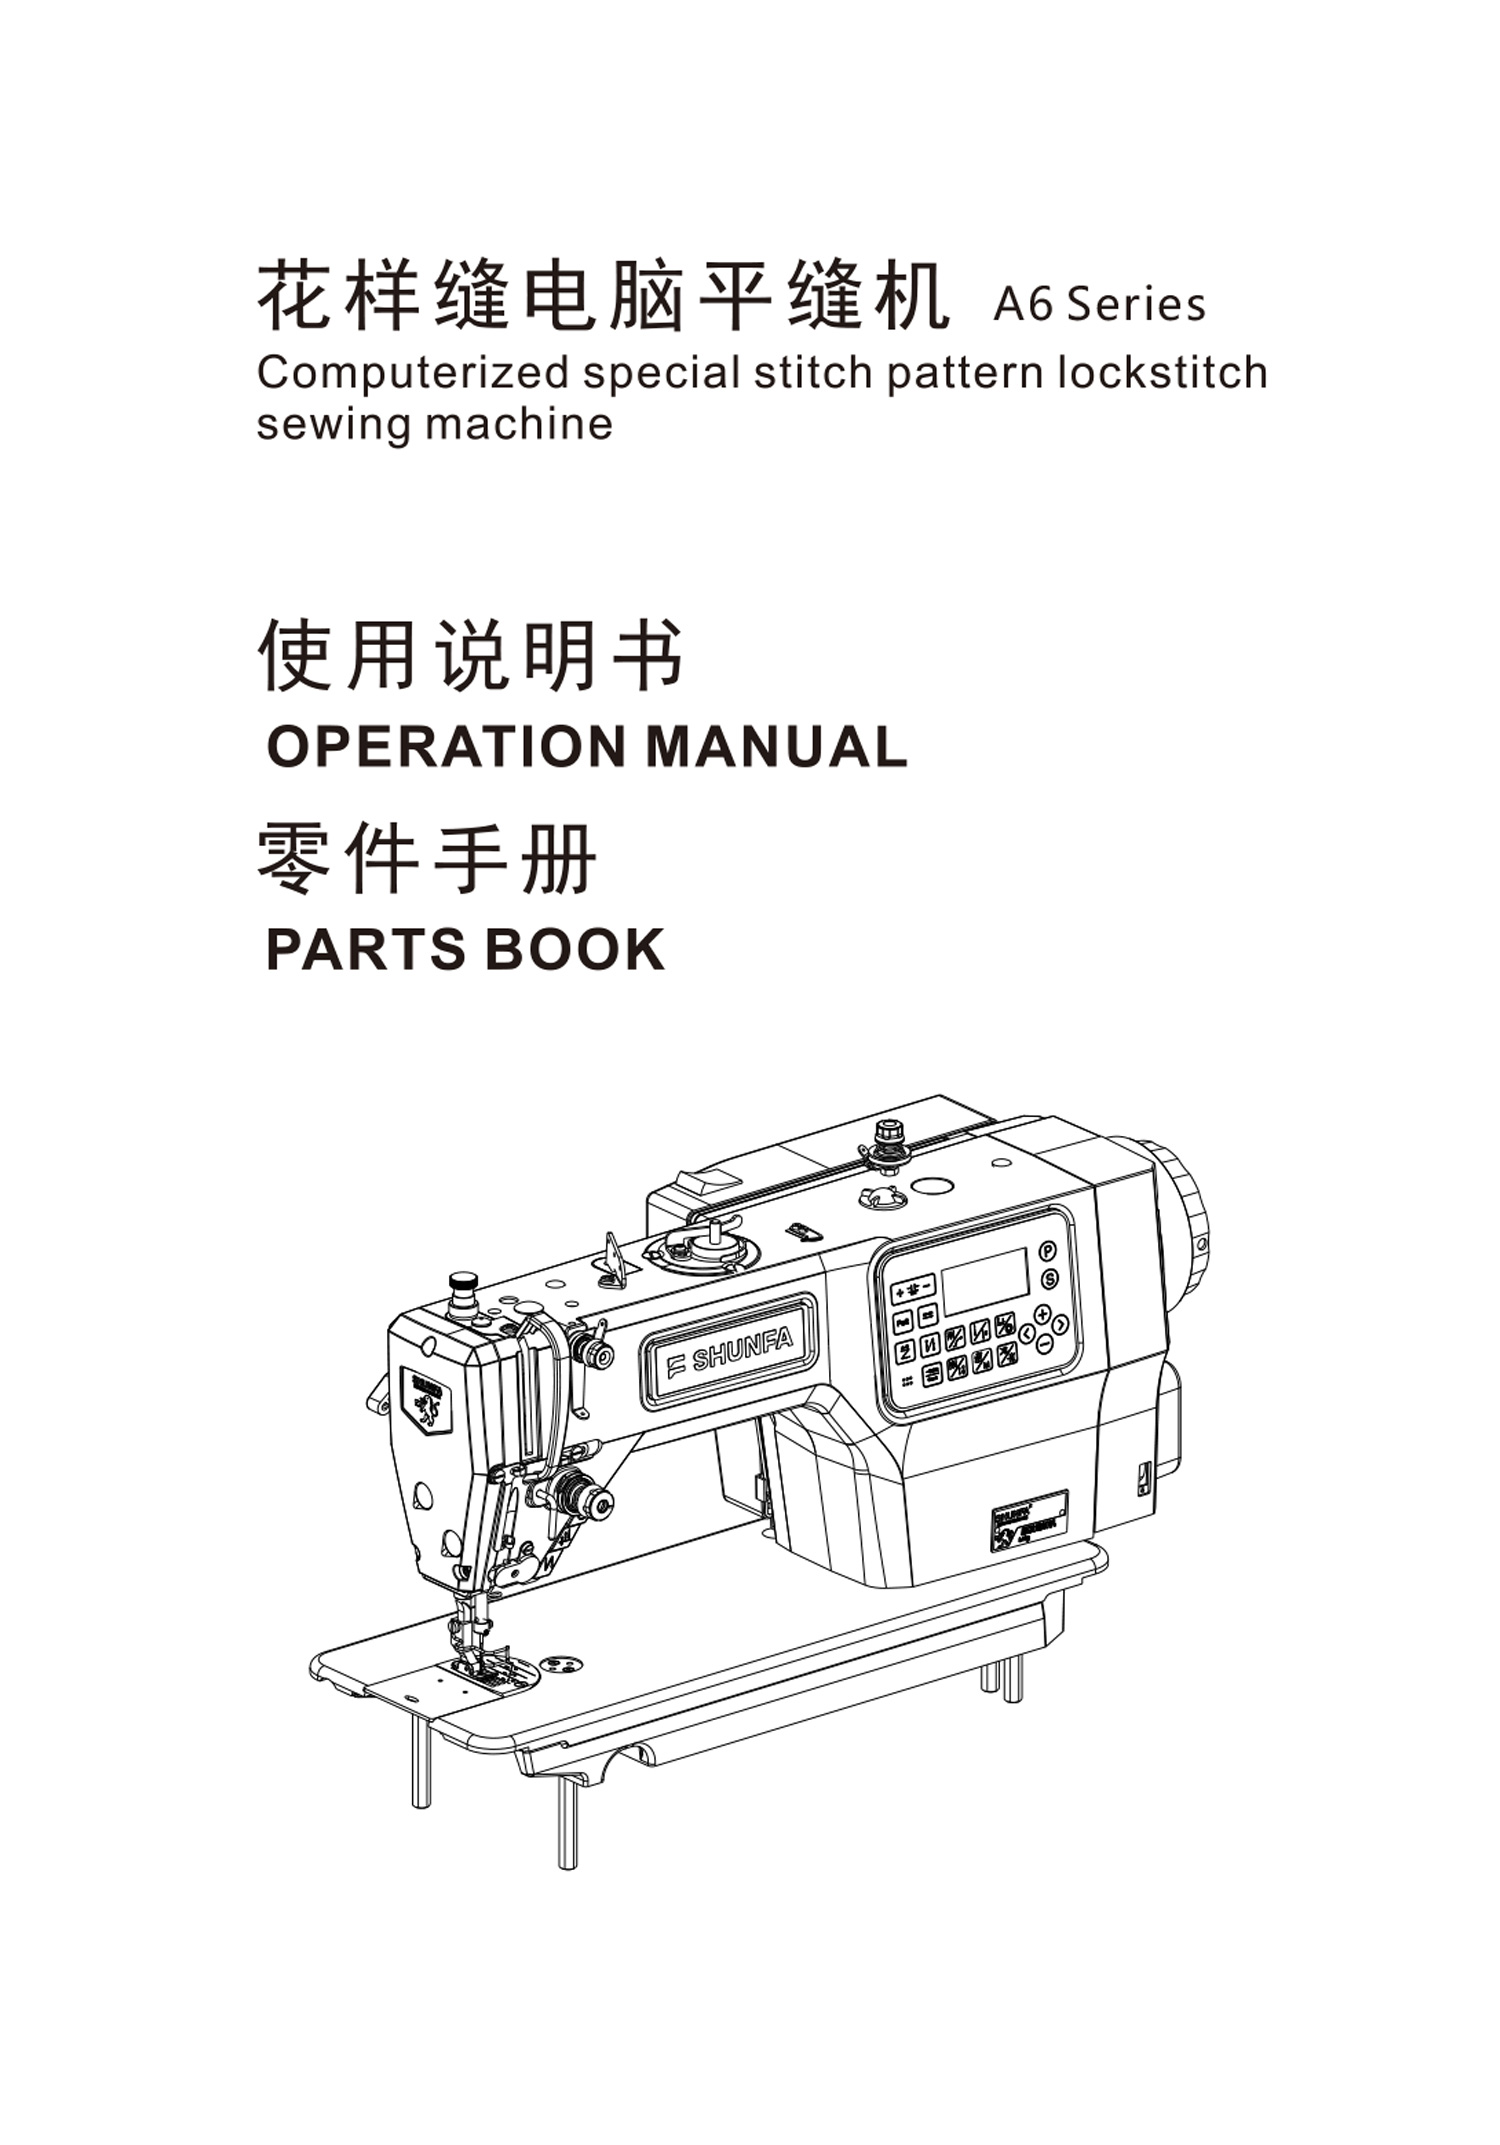 Upgraded single-step-motor-drive lockstitch sewing machine (suitable for different type of fabric)